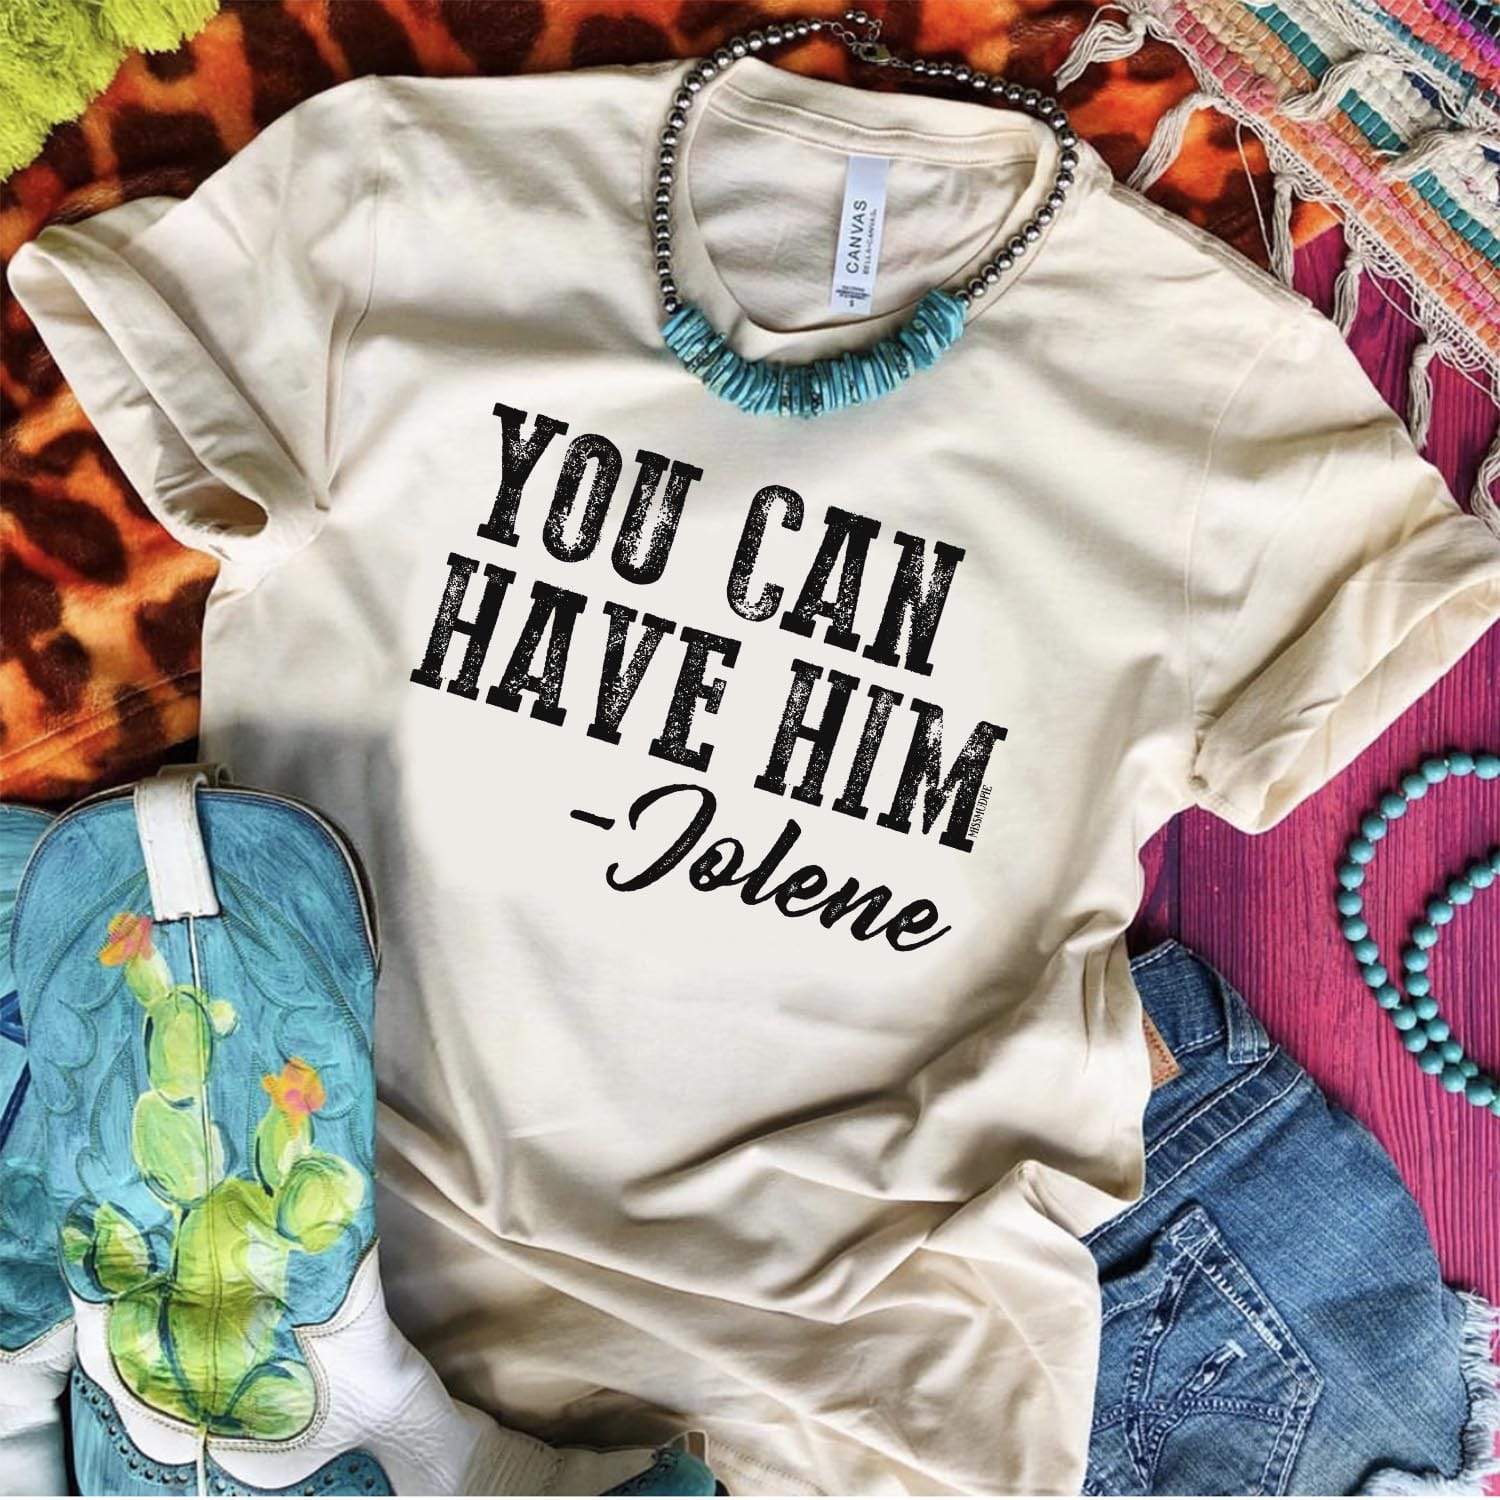 A cream colored graphic tee laid on top of different rugs. Pictured with cowgirl boots, denim shorts, and turquoise necklace. Tee shirt has a graphic that says "You can Have Him" - Jolene.